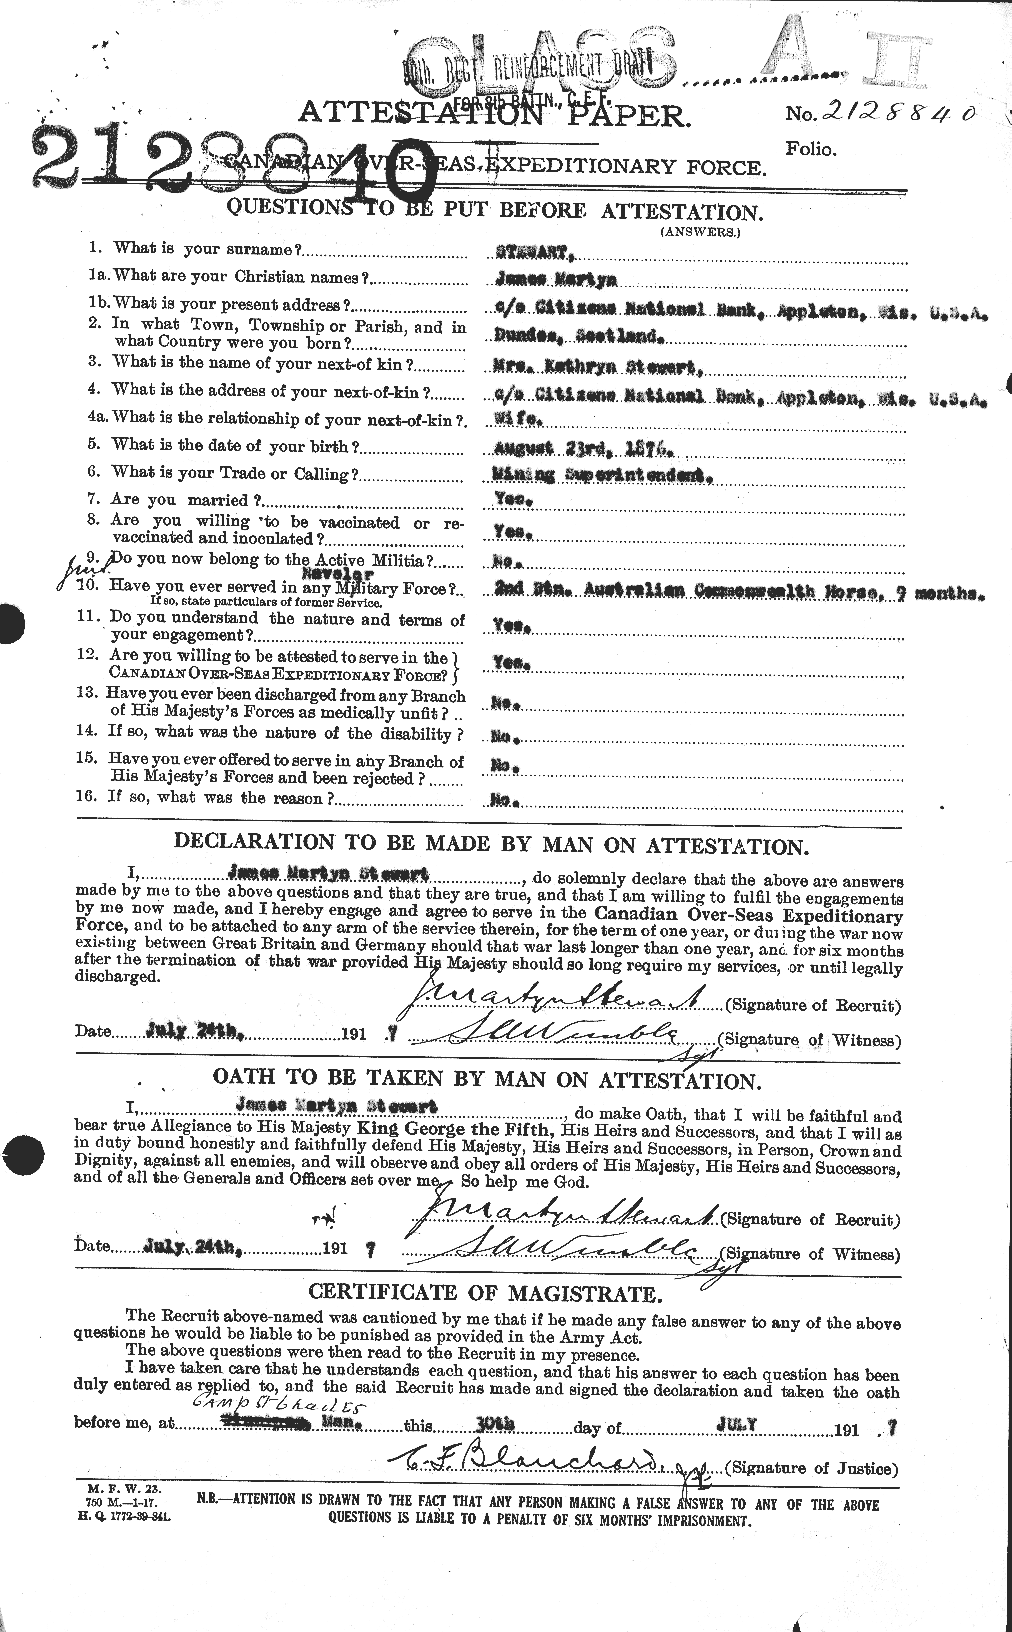 Personnel Records of the First World War - CEF 623511a